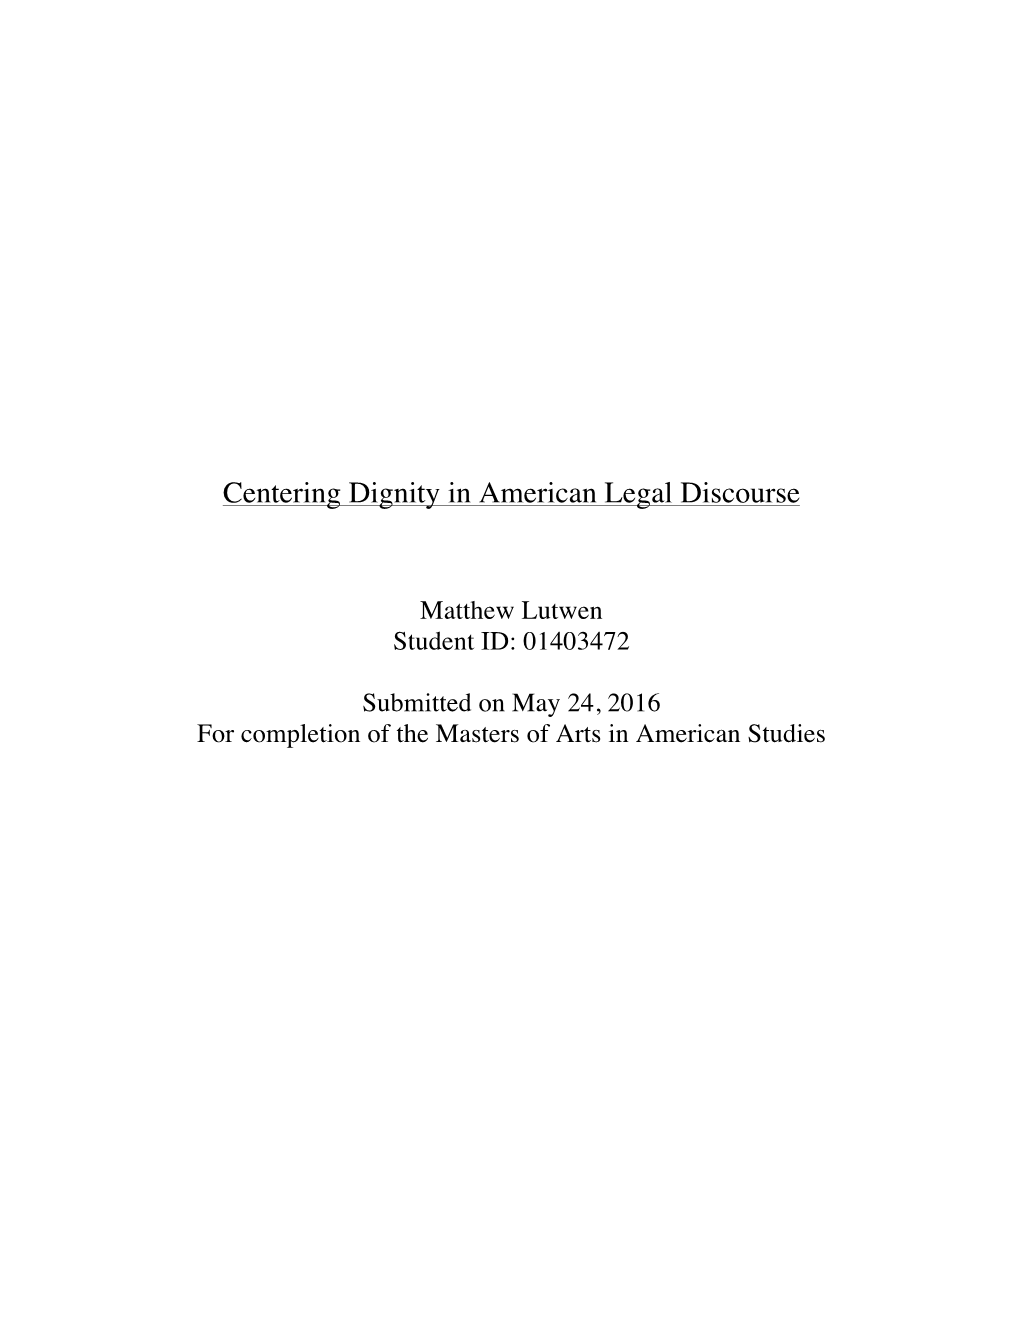 Centering Dignity in American Legal Discourse